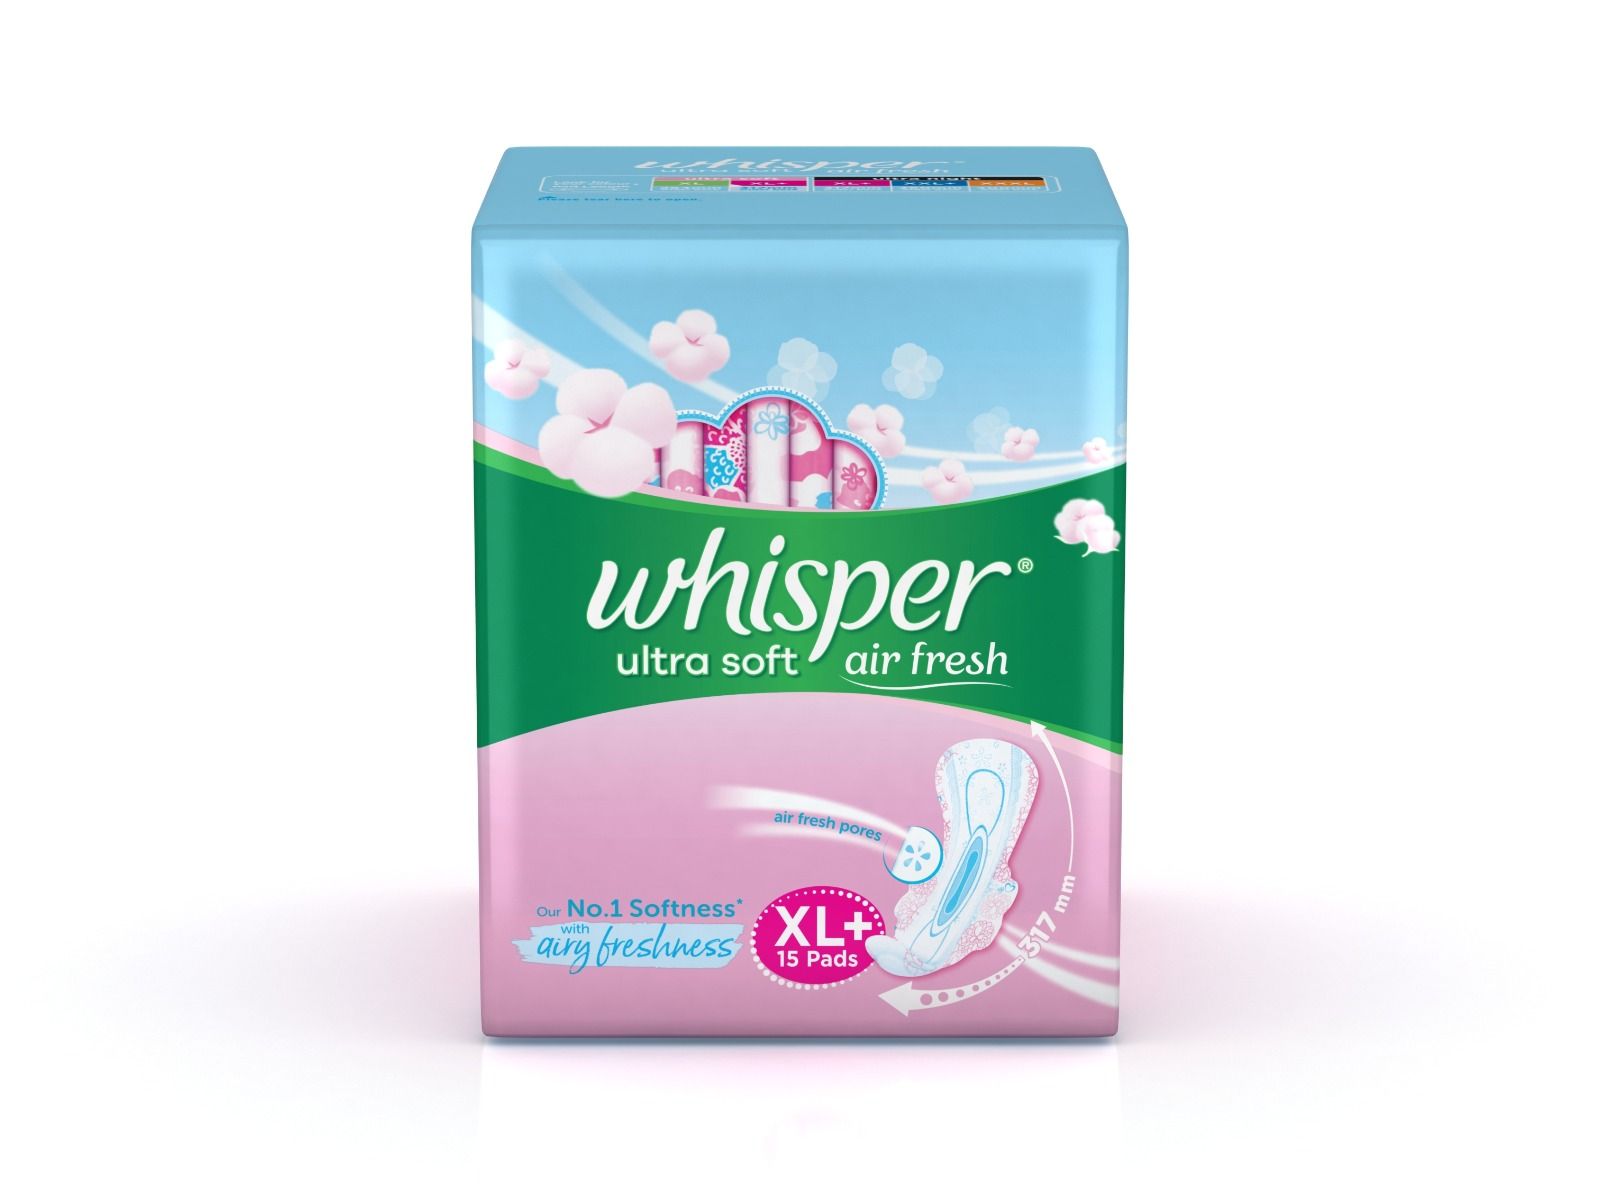 Whisper Ultra Soft Air Fresh Sanitary Pads, XL+, 15 Count, Pack of 1 